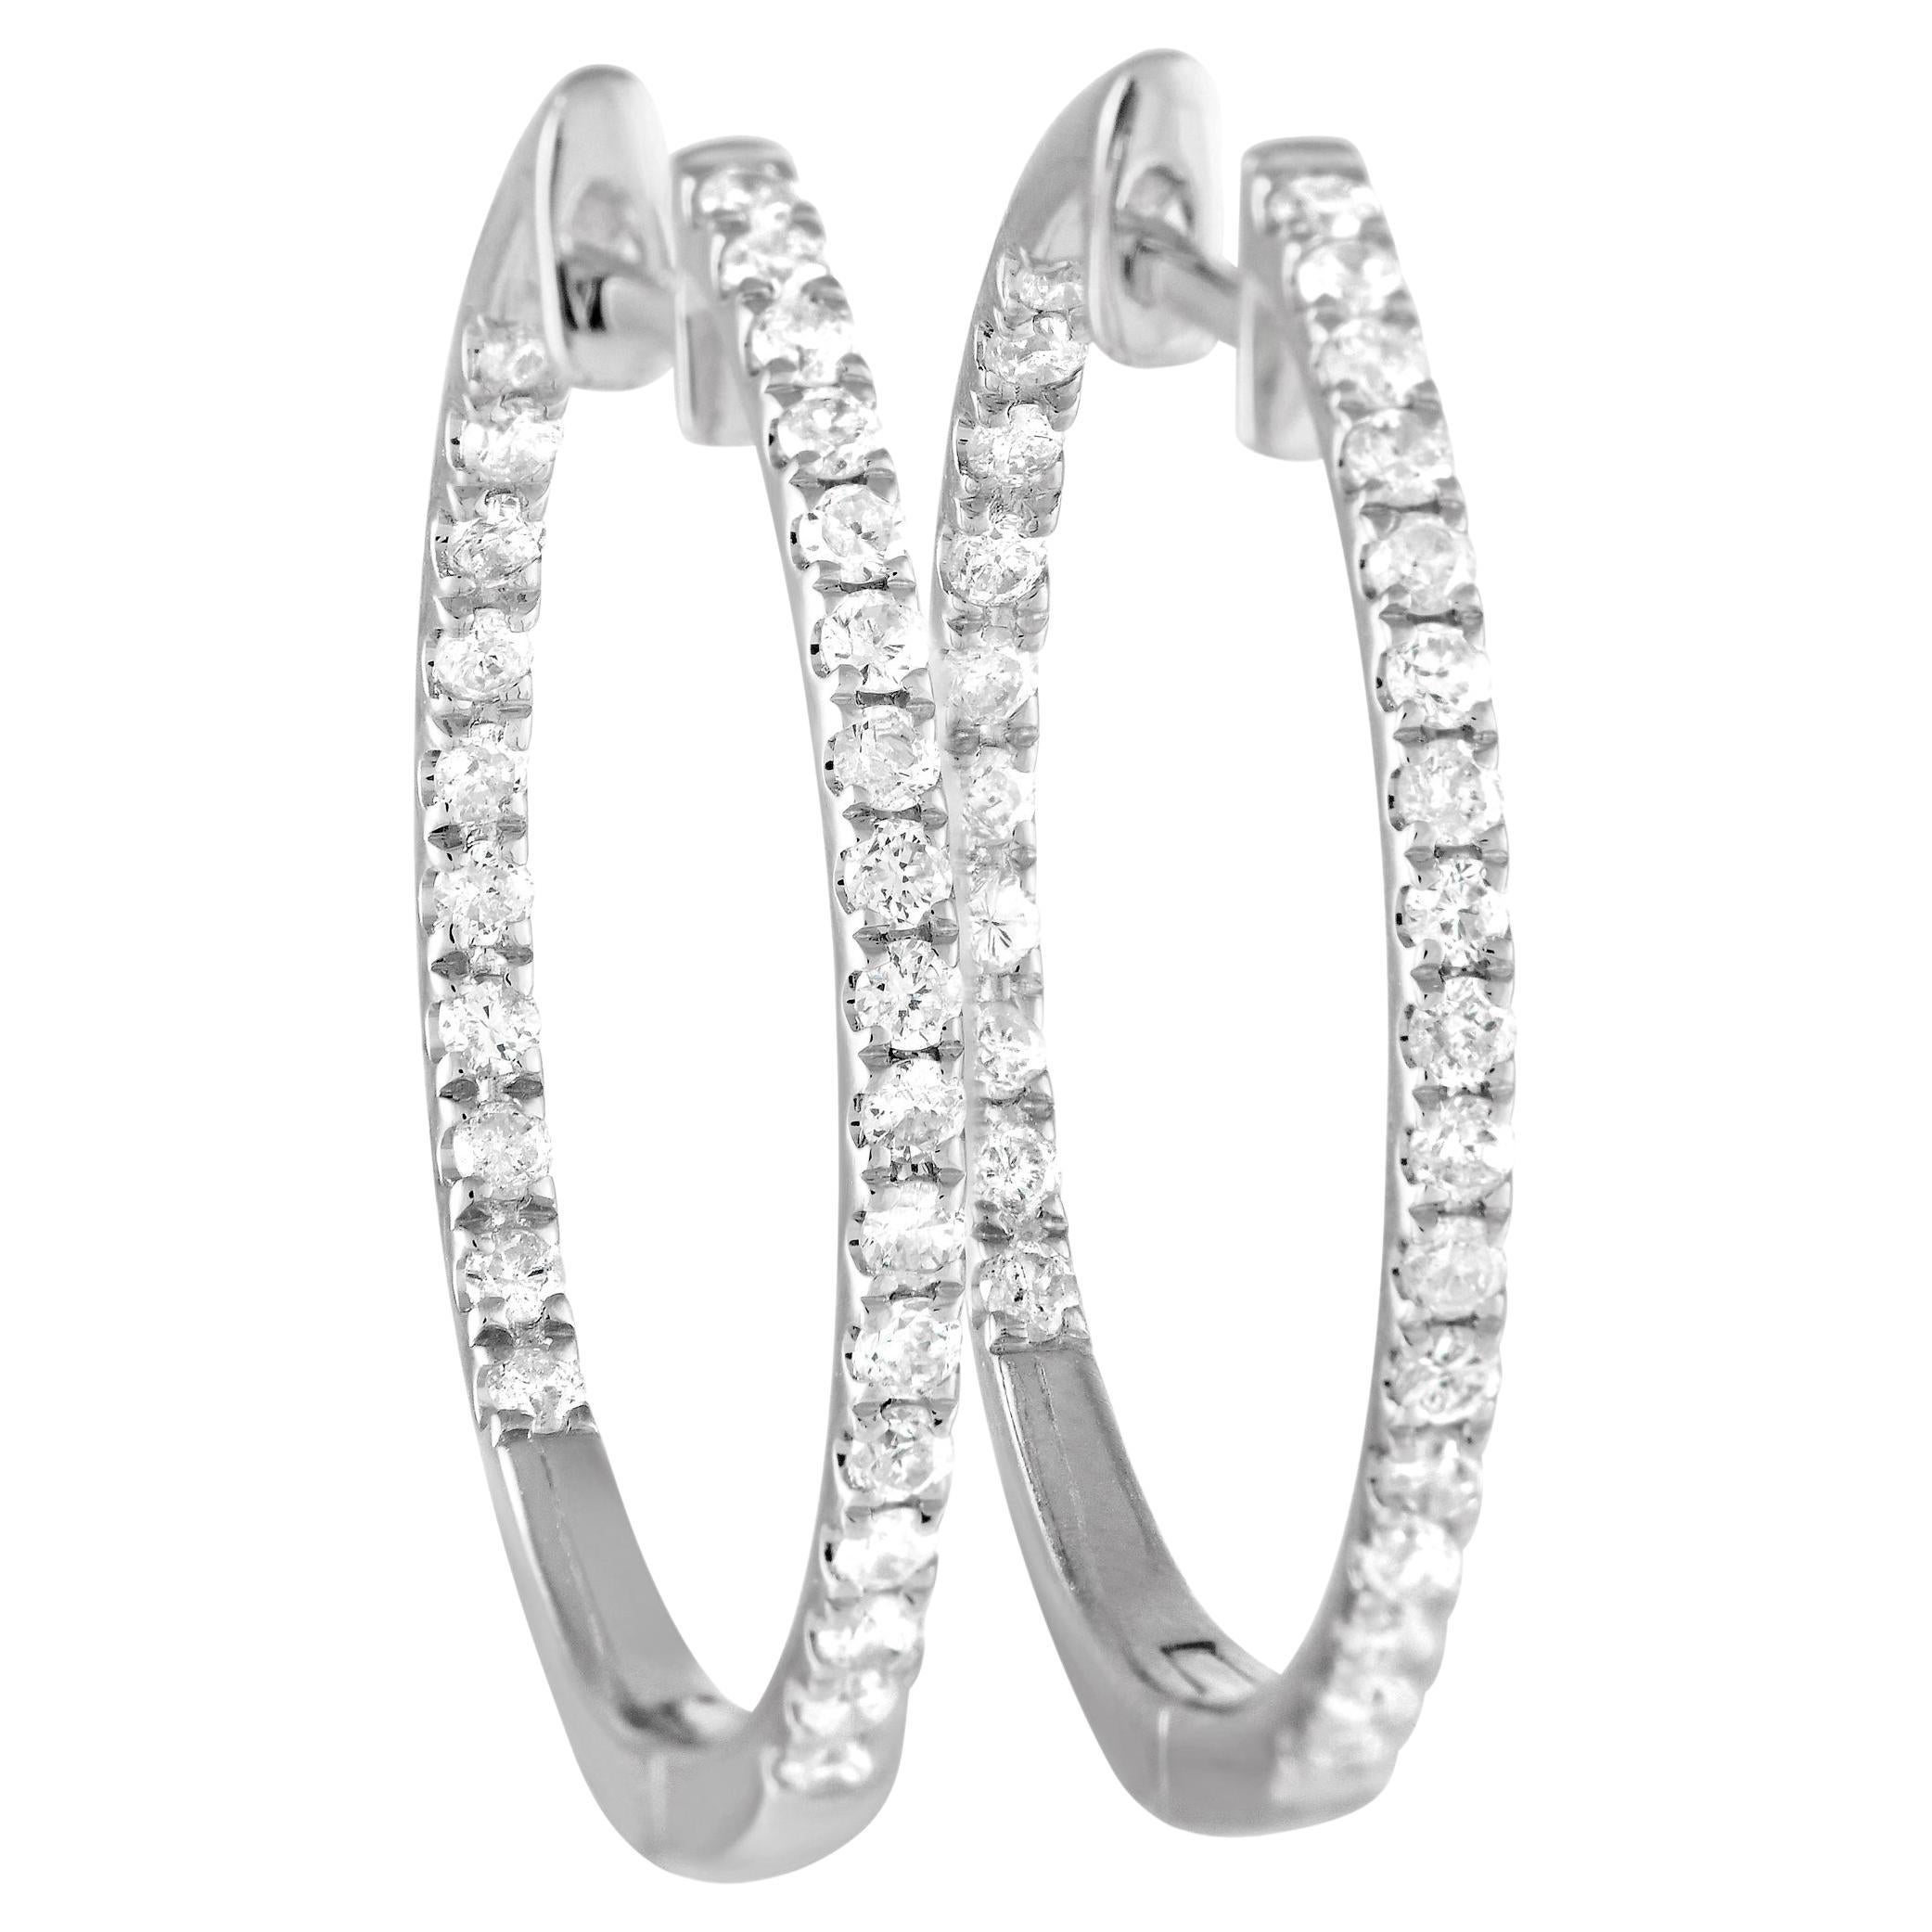 LB Exclusive 14k White Gold 0.50 Carat Diamond Inside-Out Hoop Earrings For Sale